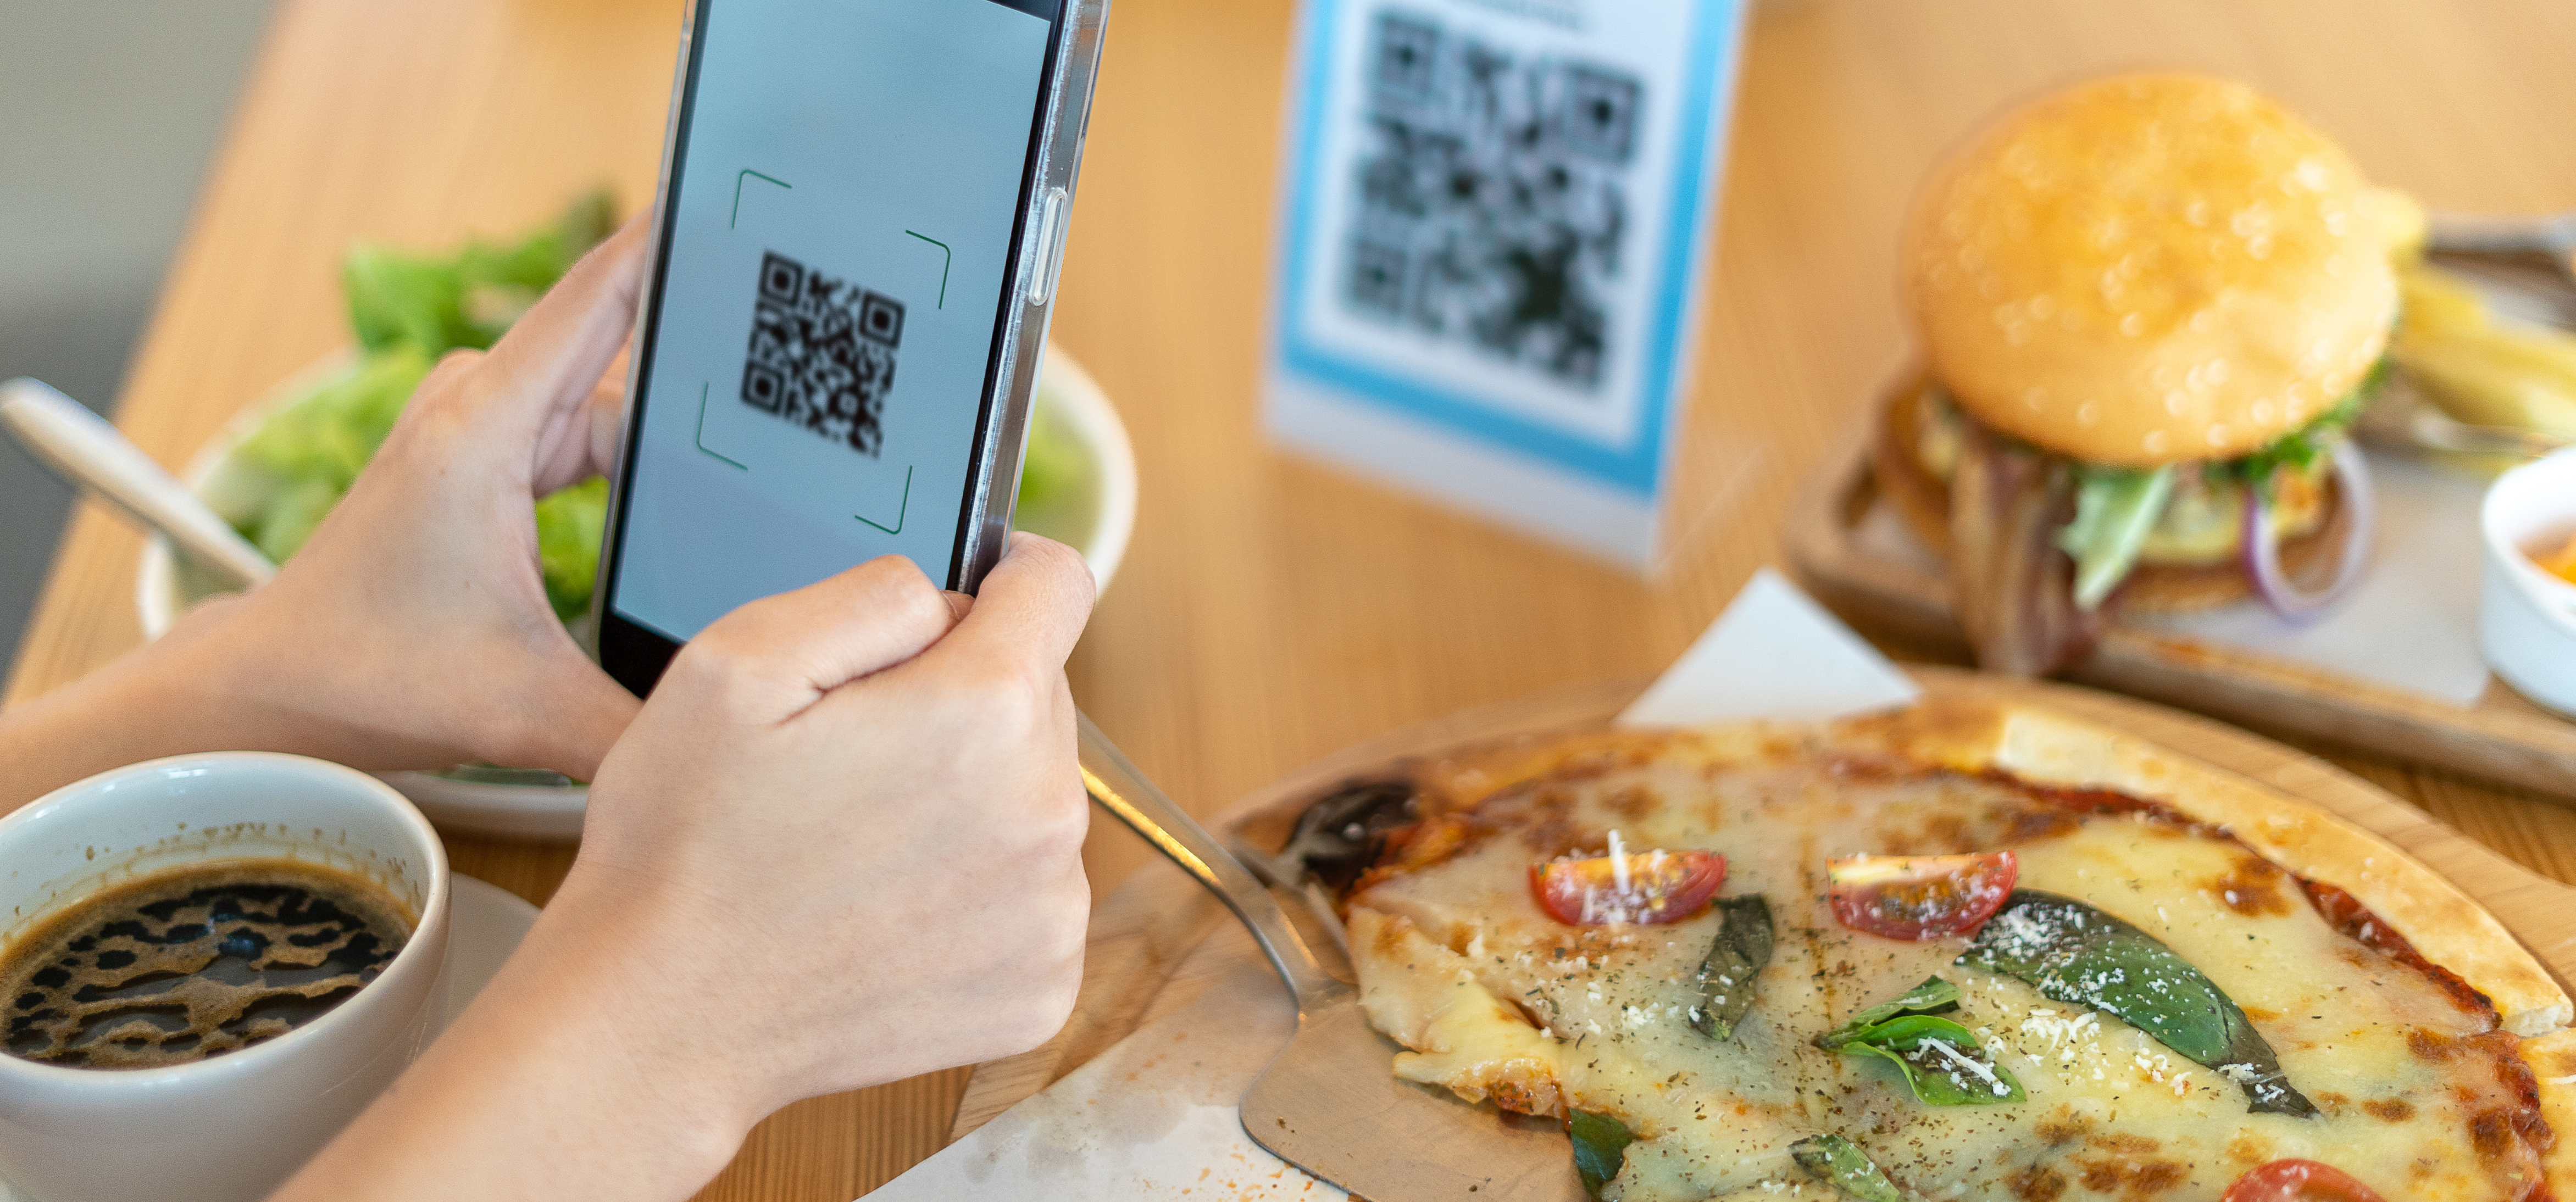 a woman is eating at an Italian pizza restaurant and the menu uses qr codes